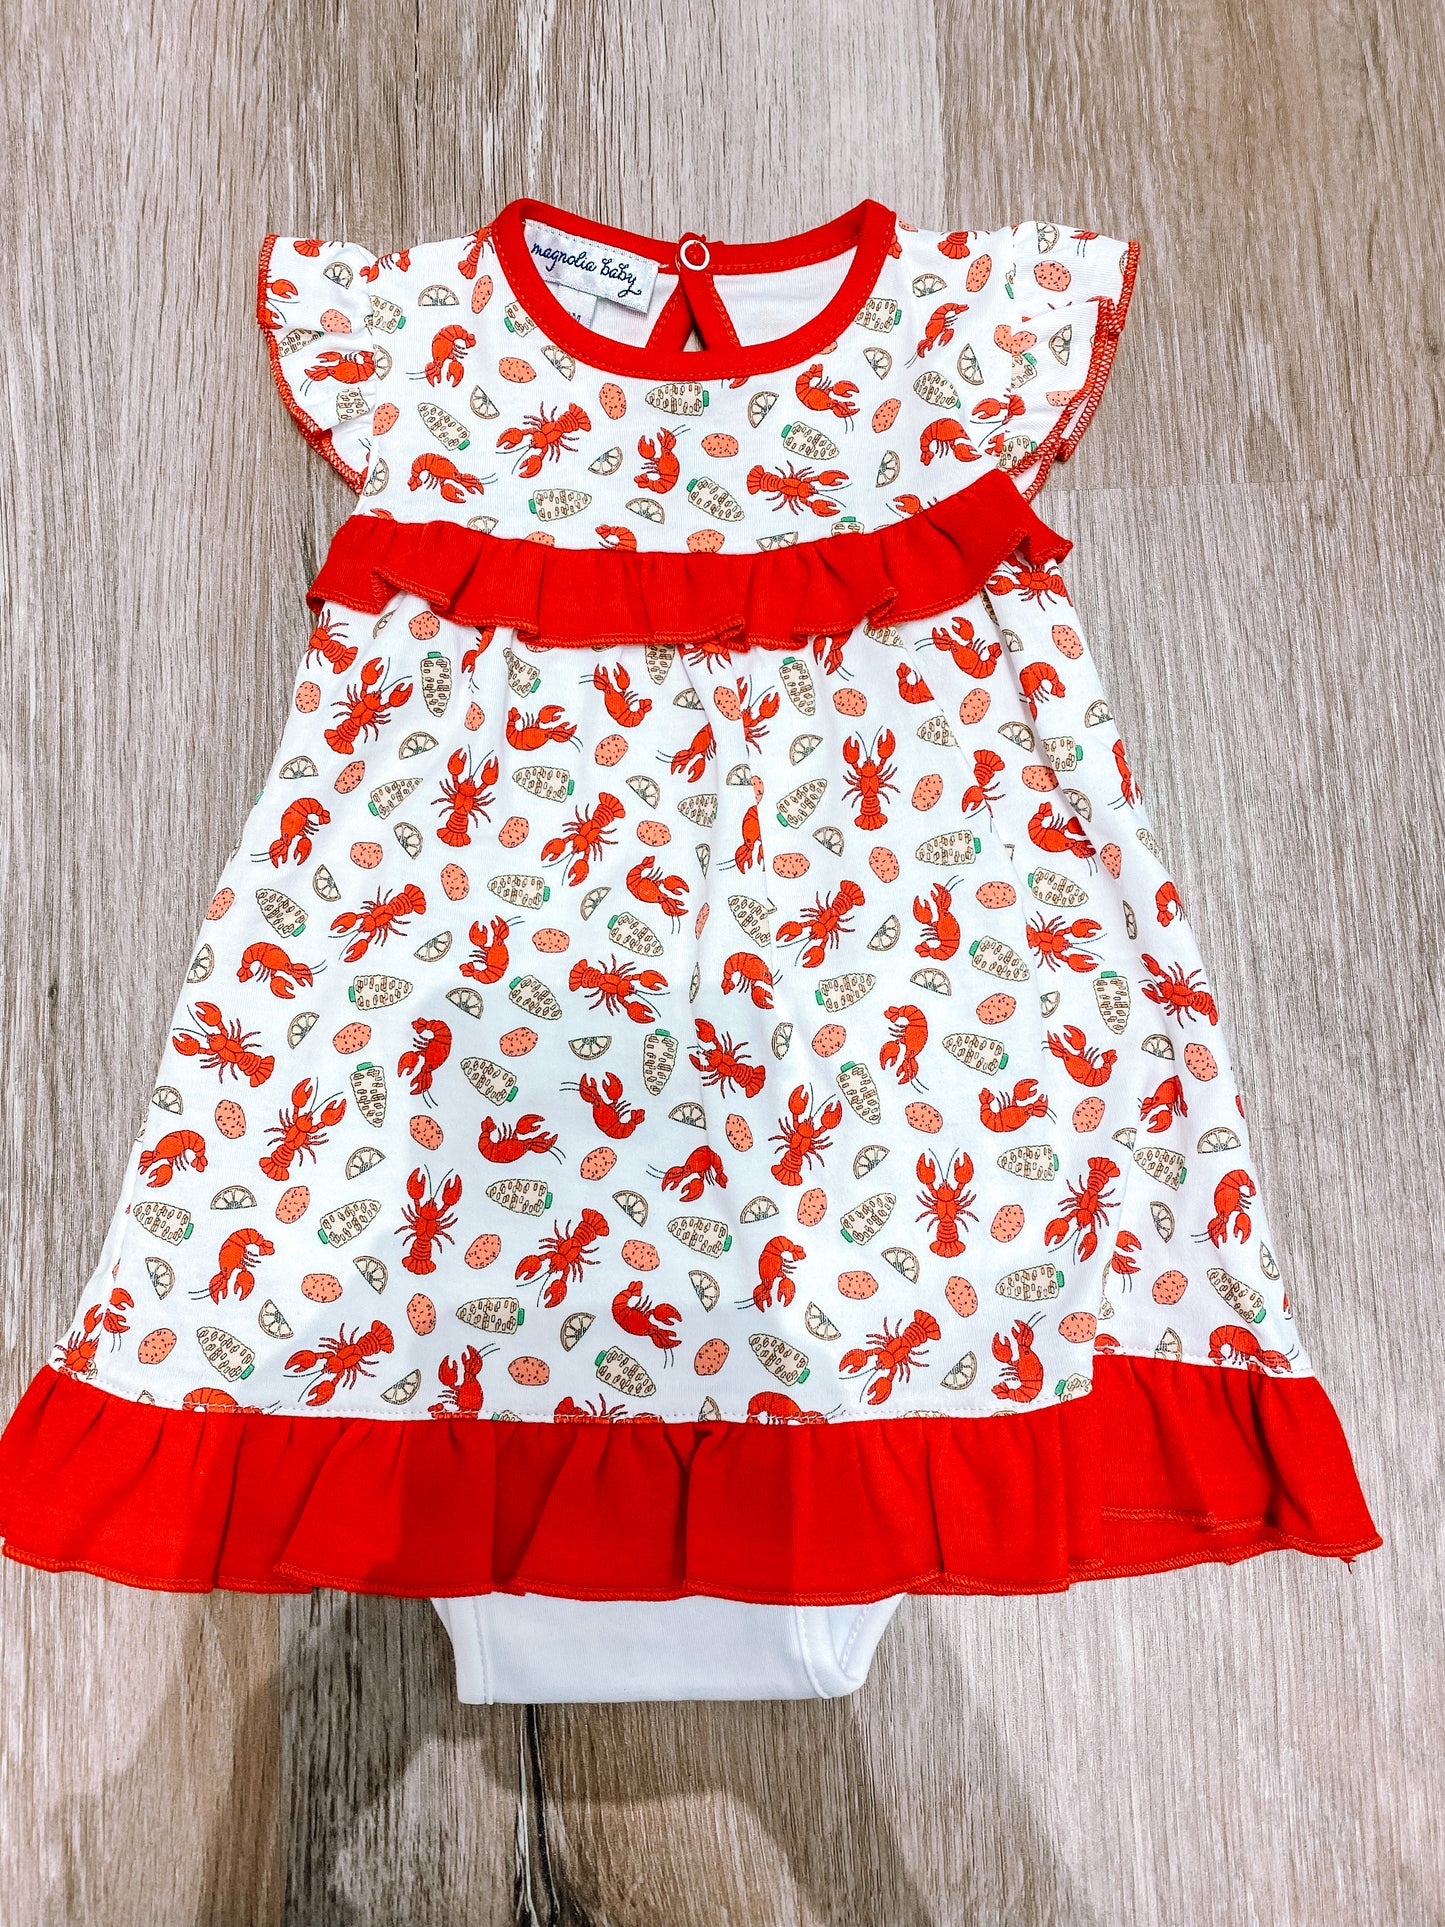 Heads or Tails Printed Ruffle Dress Set  - Doodlebug's Children's Boutique